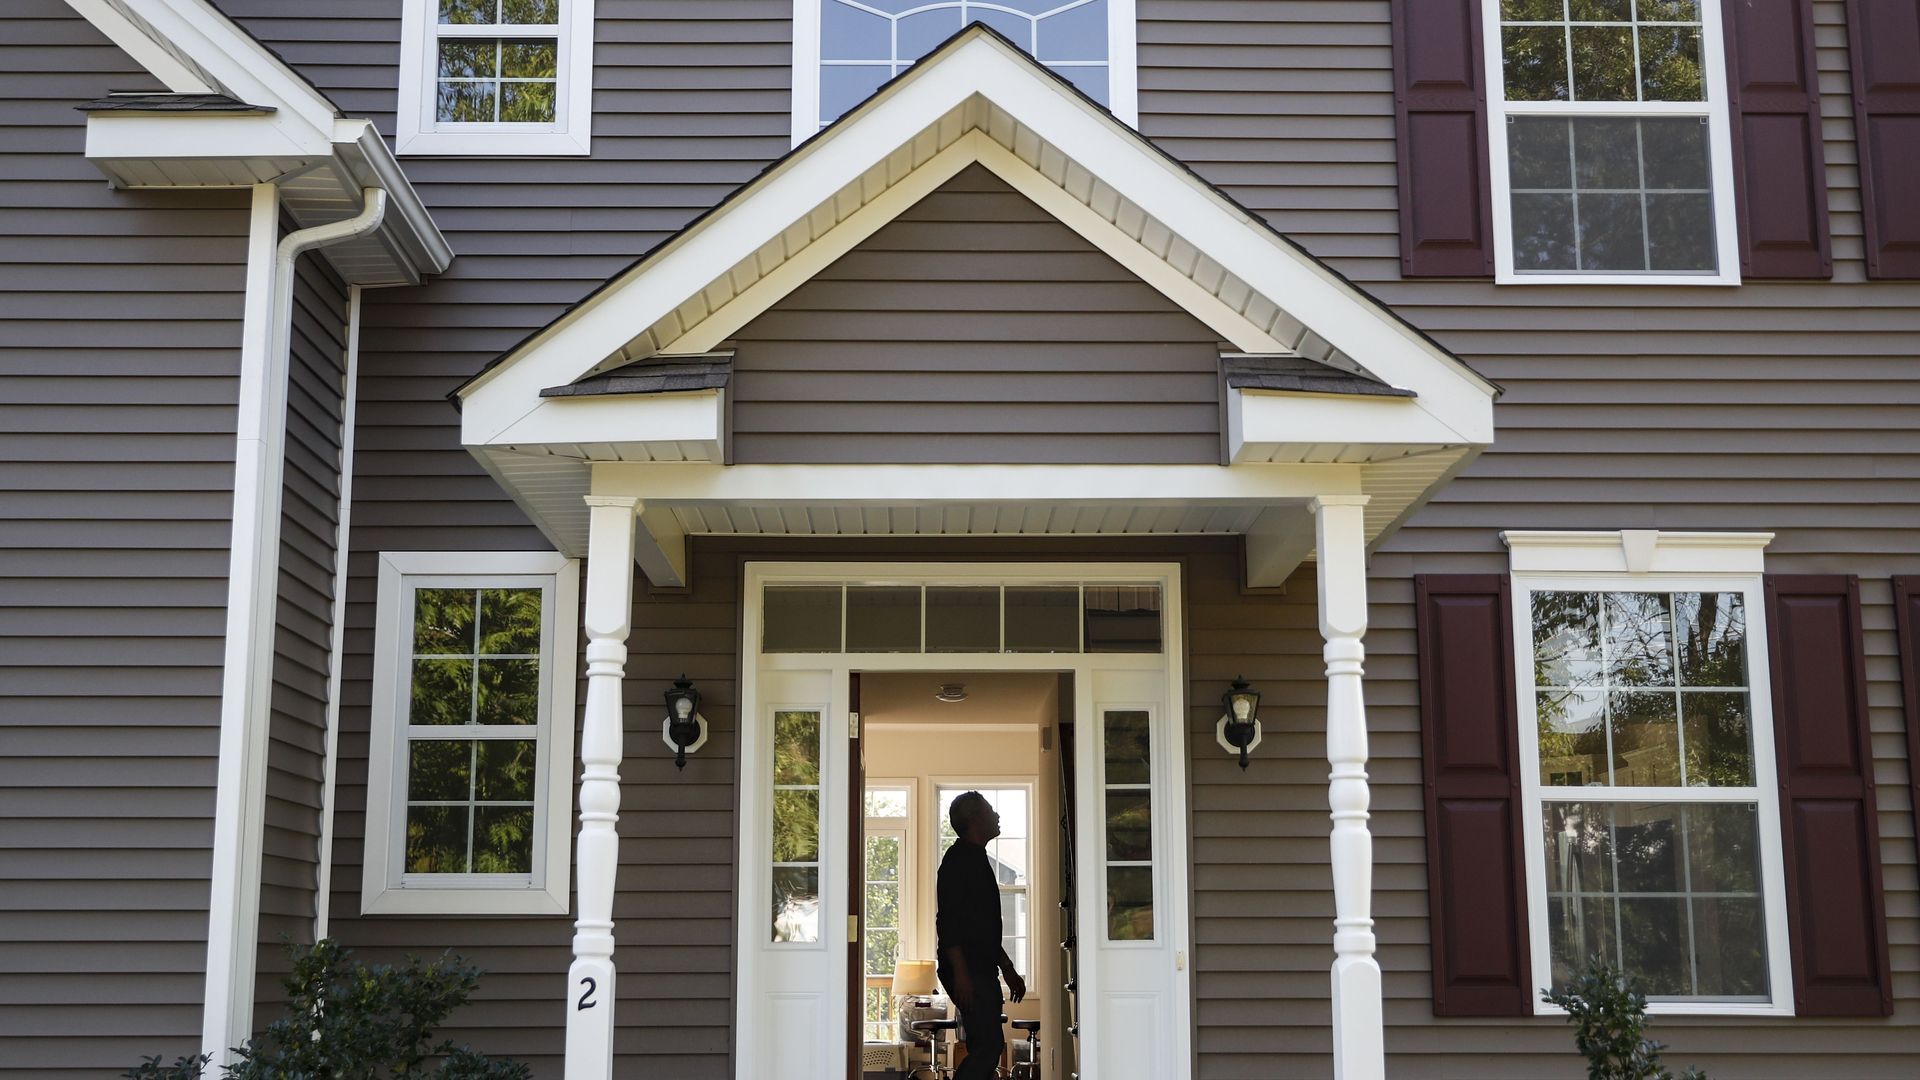 A man stands in the doorway to his house